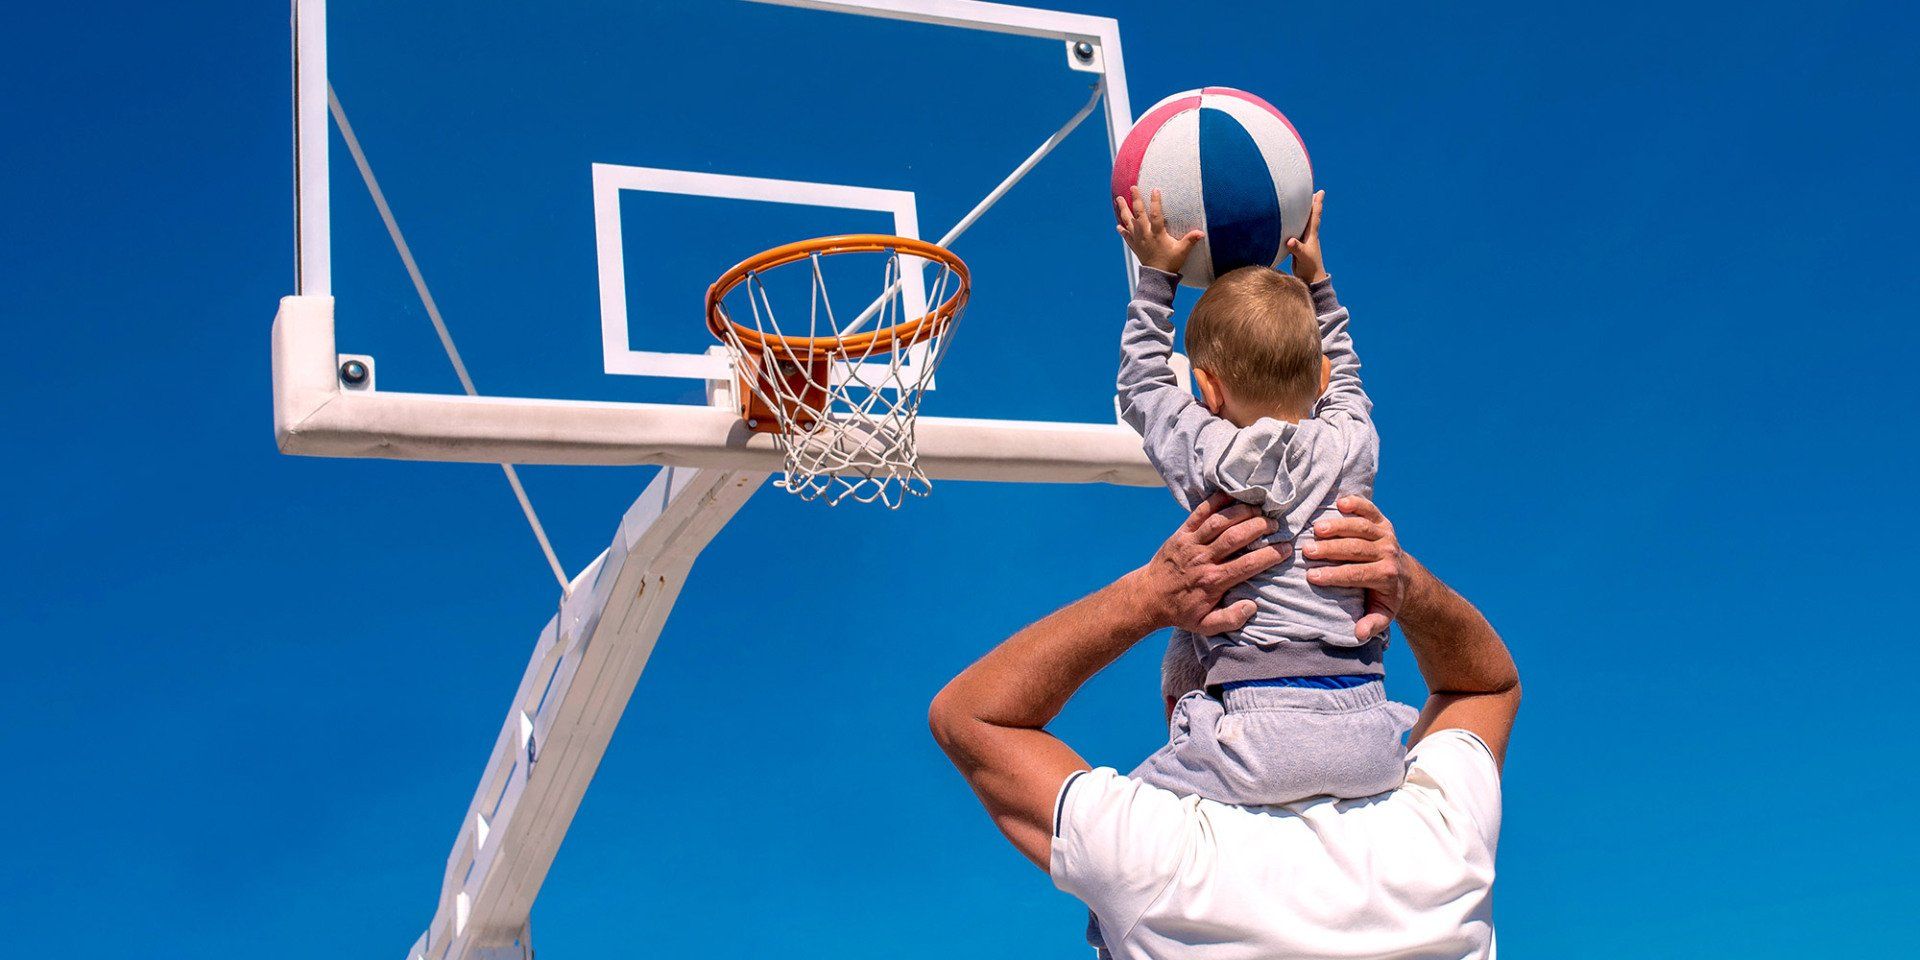 dad lifts son on his shoulders to dunk a basketball